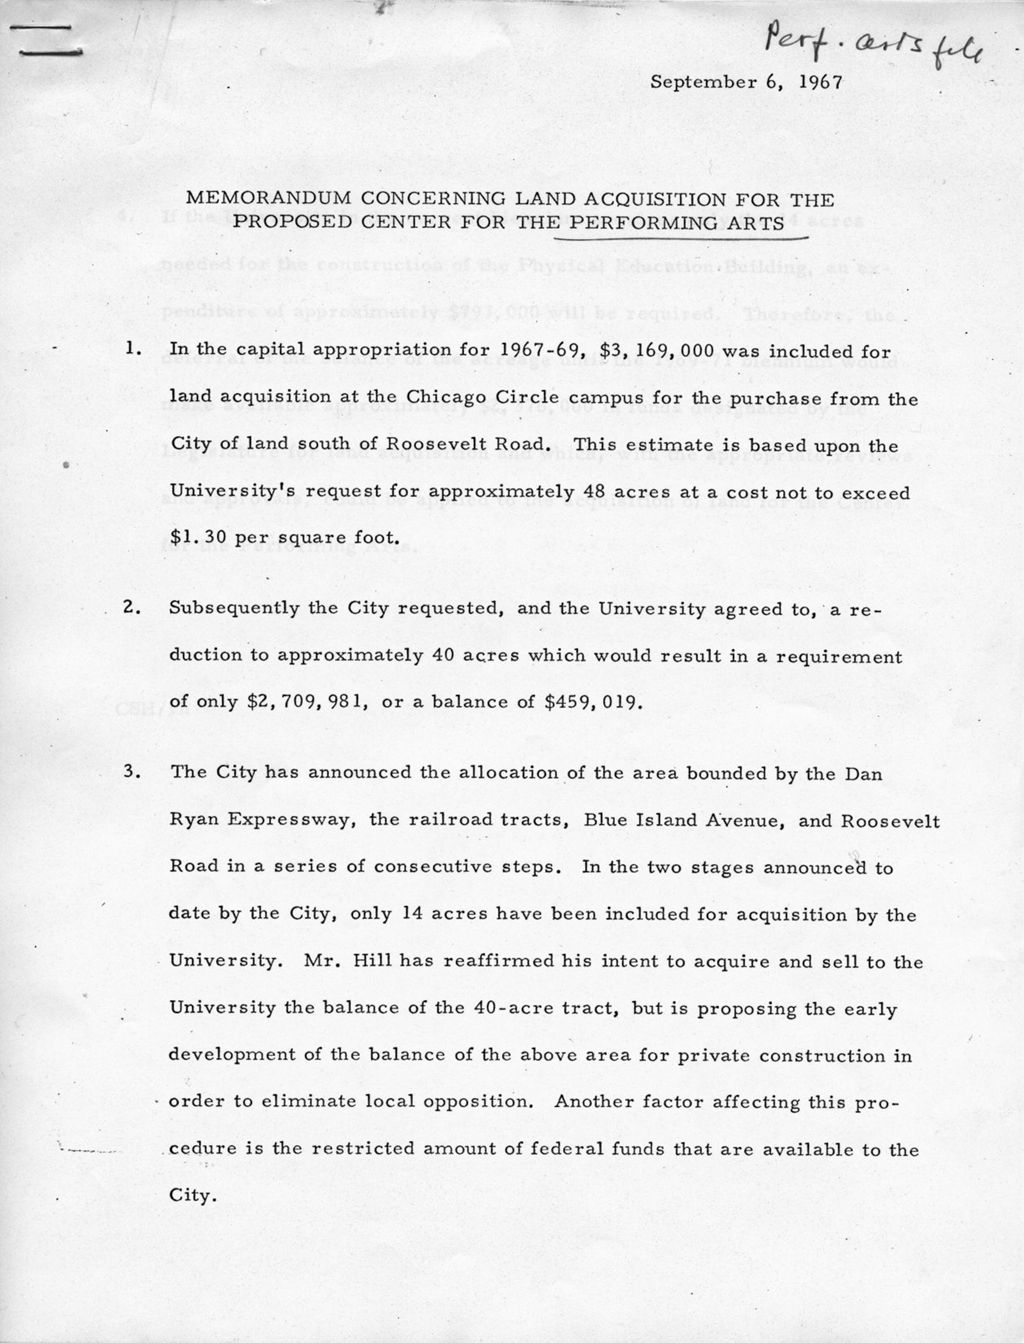 Miniature of Memorandum: Land Acquisition for the Proposed Center for the Performing Arts